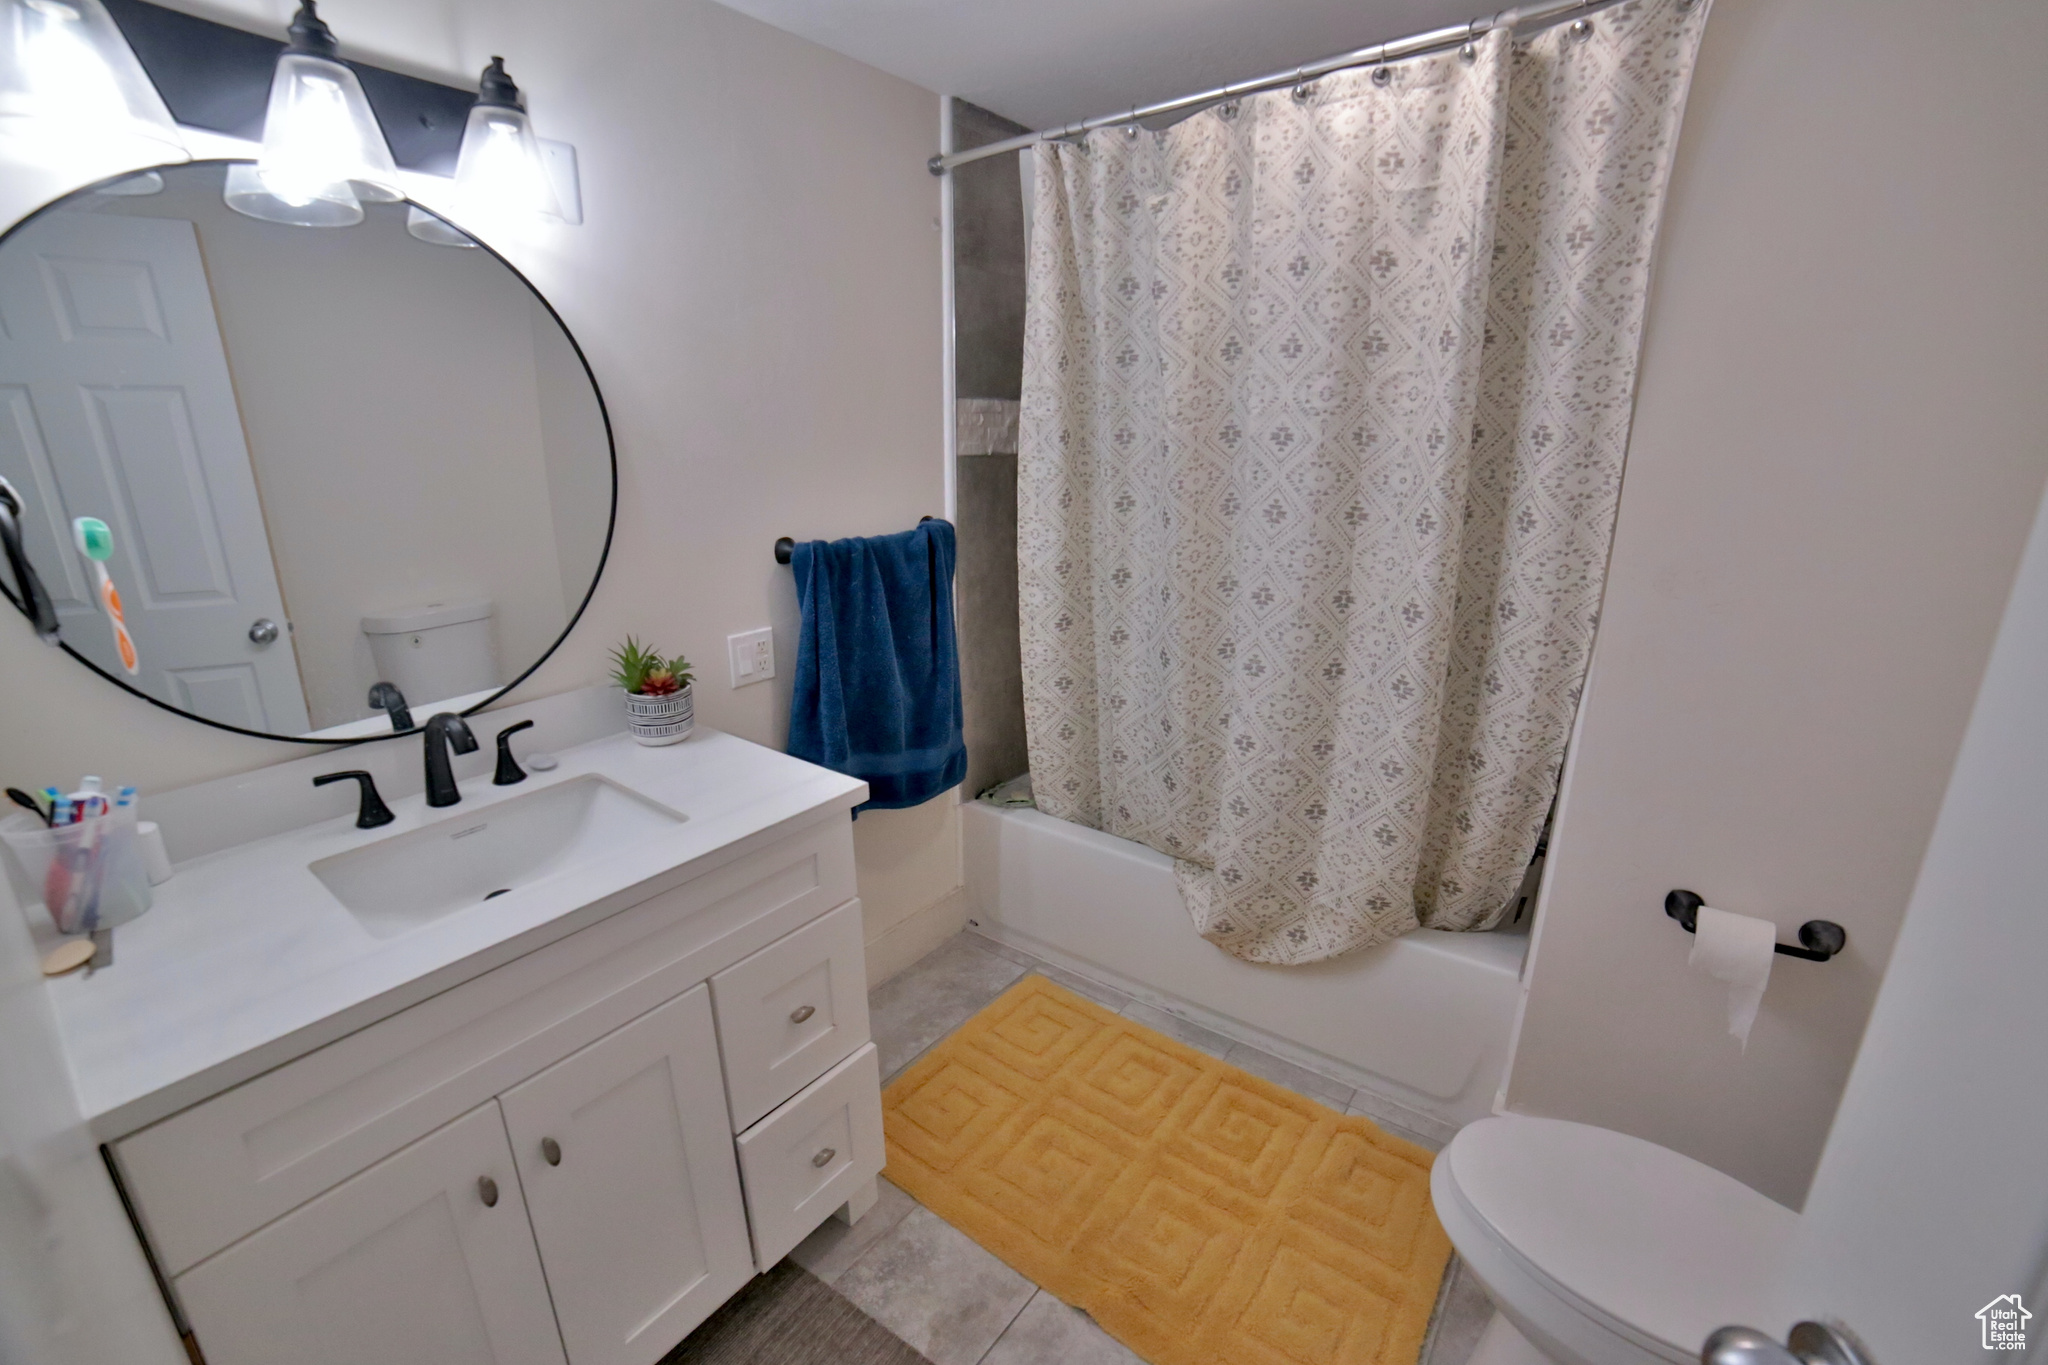 Full bathroom featuring shower / bath combination with curtain, tile floors, toilet, and oversized vanity